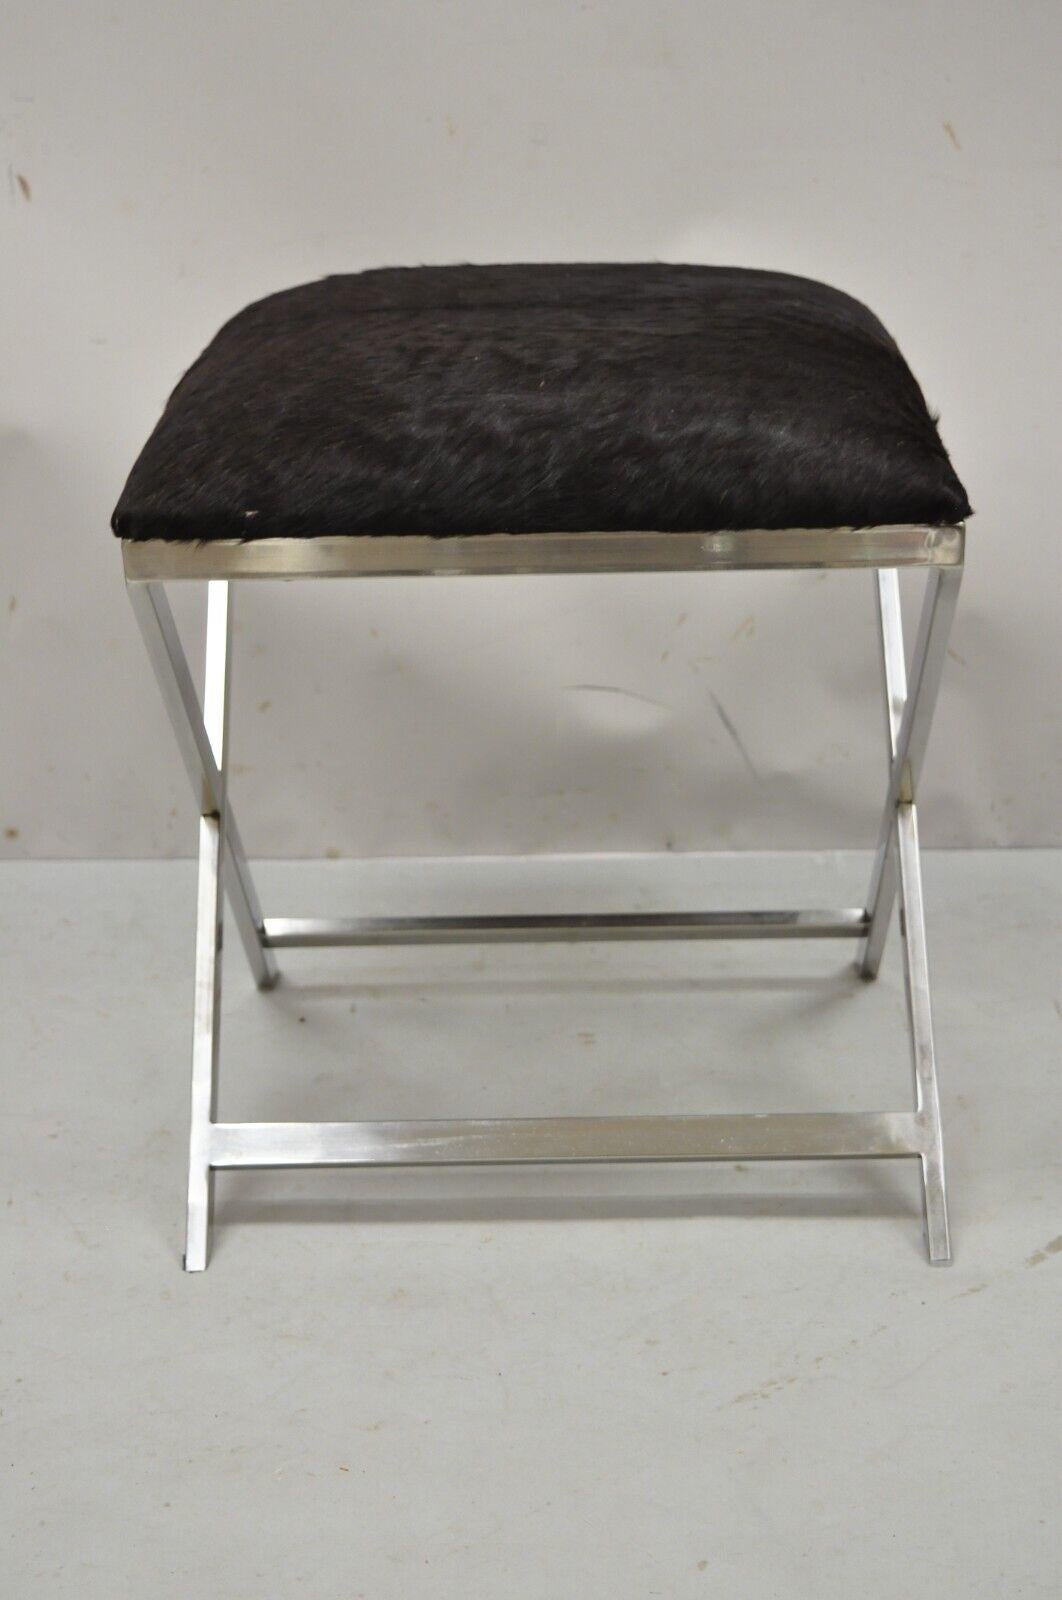 Modern Chrome Frame X-Frame Metal Stool with Cowhide Upholstery. Item features cowhide upholstery, metal chrome x-frame, clean modernist lines, great style and form. Circa late 20th Century - 21st Century. Measurements: 21